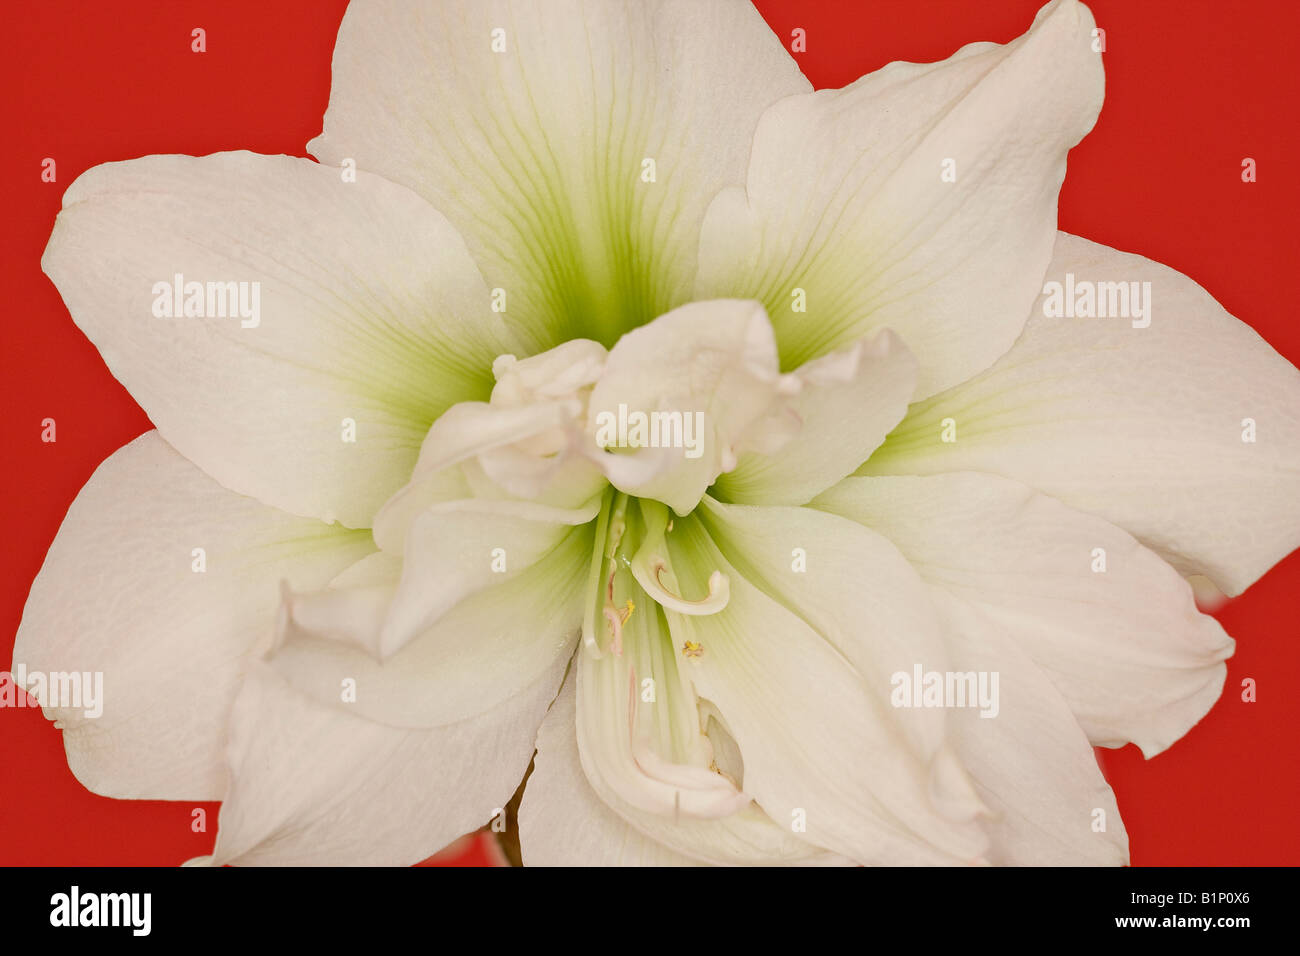 Close up of a Double Amaryllis flower 'White Nymph' against a red background Stock Photo